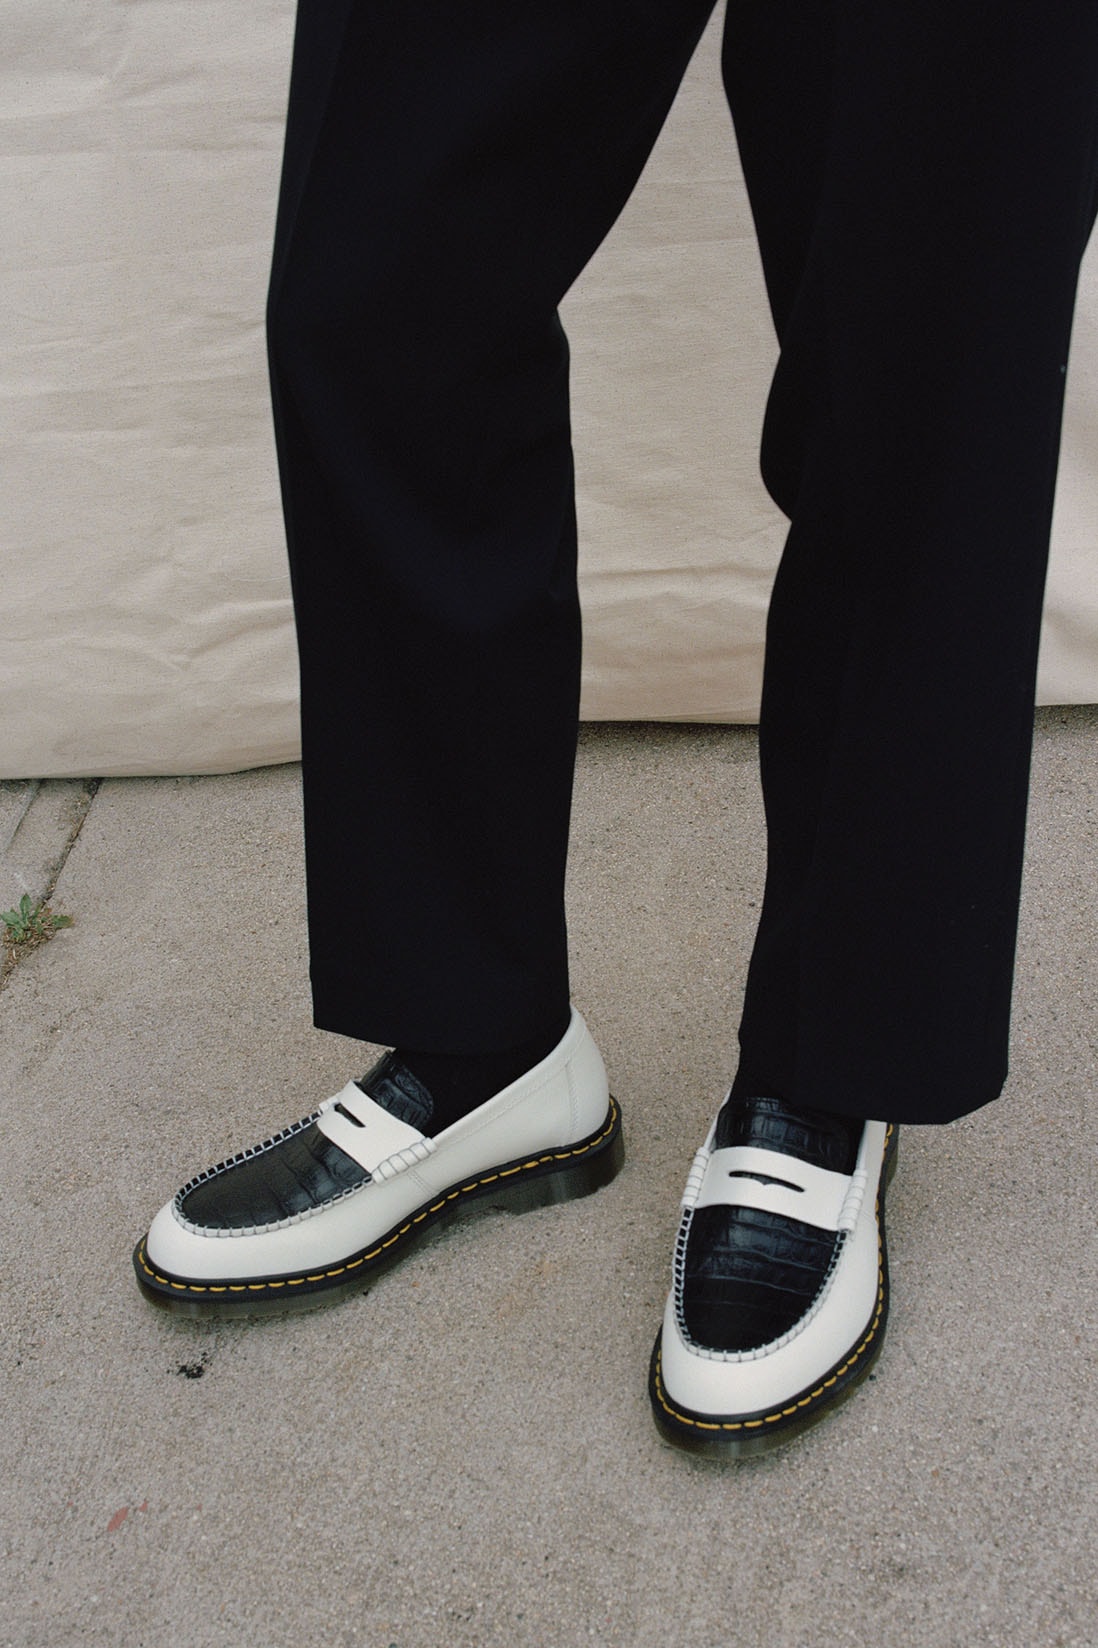 Dr Martens x Stussy Loafer Collab First Look Sneakers Kicks Trainers Shoes Release Details White Black Green Cherry Red Penton